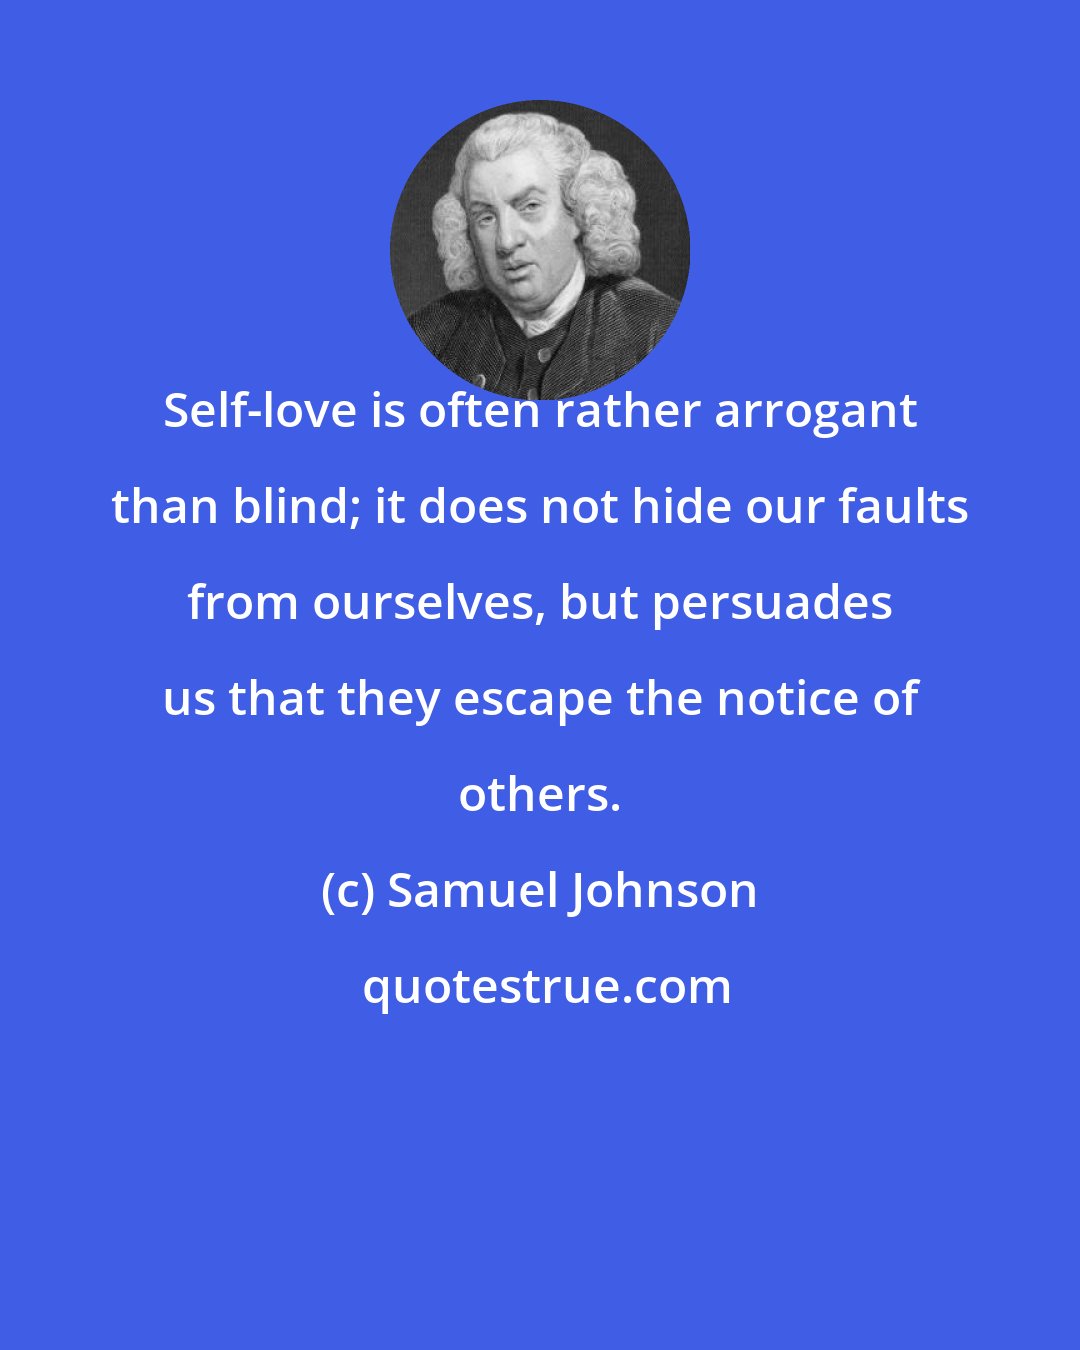 Samuel Johnson: Self-love is often rather arrogant than blind; it does not hide our faults from ourselves, but persuades us that they escape the notice of others.